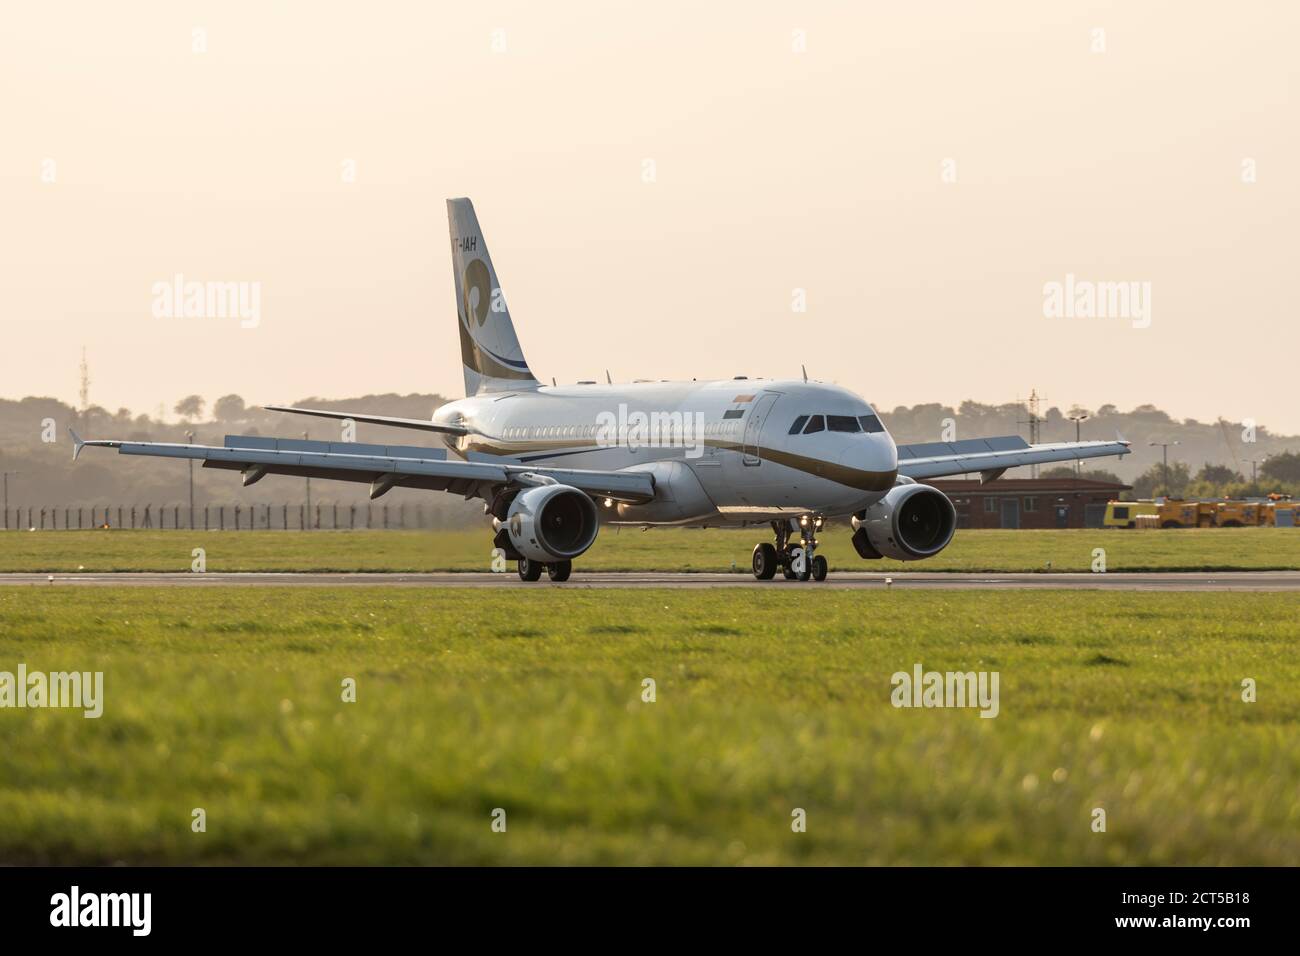 Reliance Industries Airbus A319 ACJ landing on September 18th 2020 at London Luton Airport, Bedfordshire, UK Stock Photo